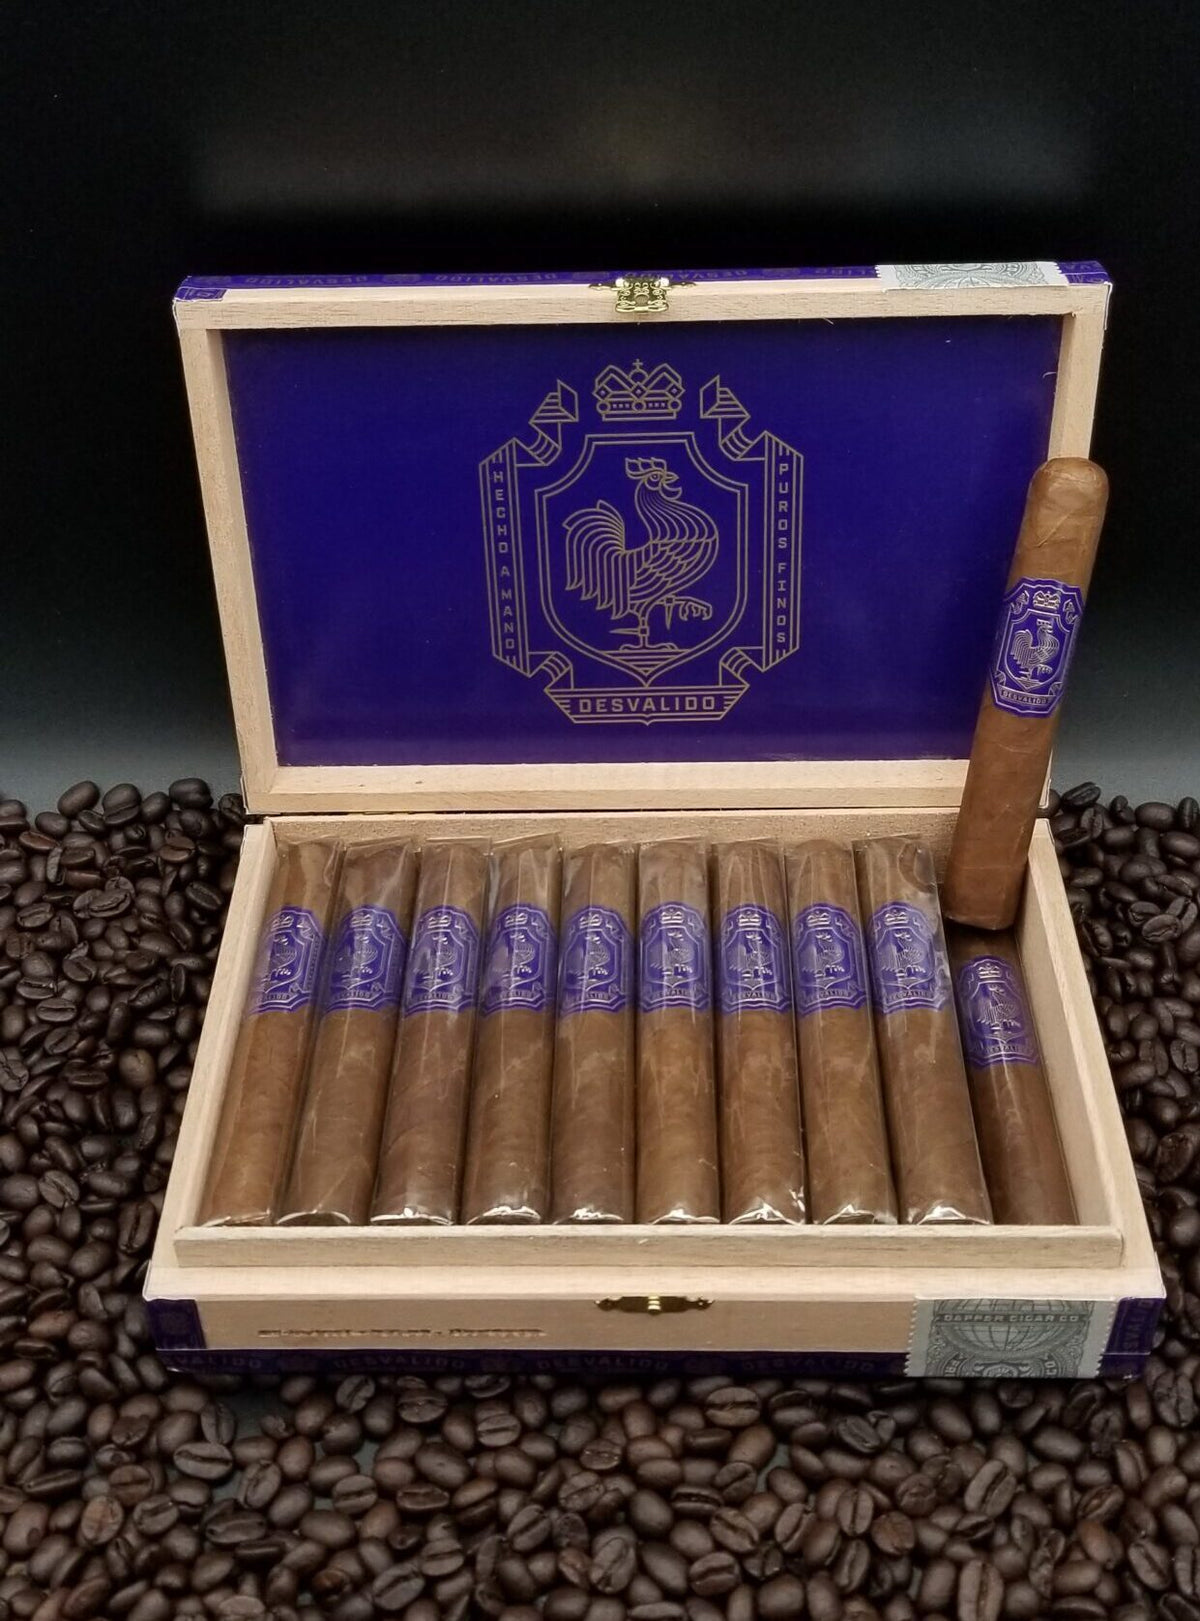 Dapper Desvalido Robusto cigars supplied by Sir Louis Cigars